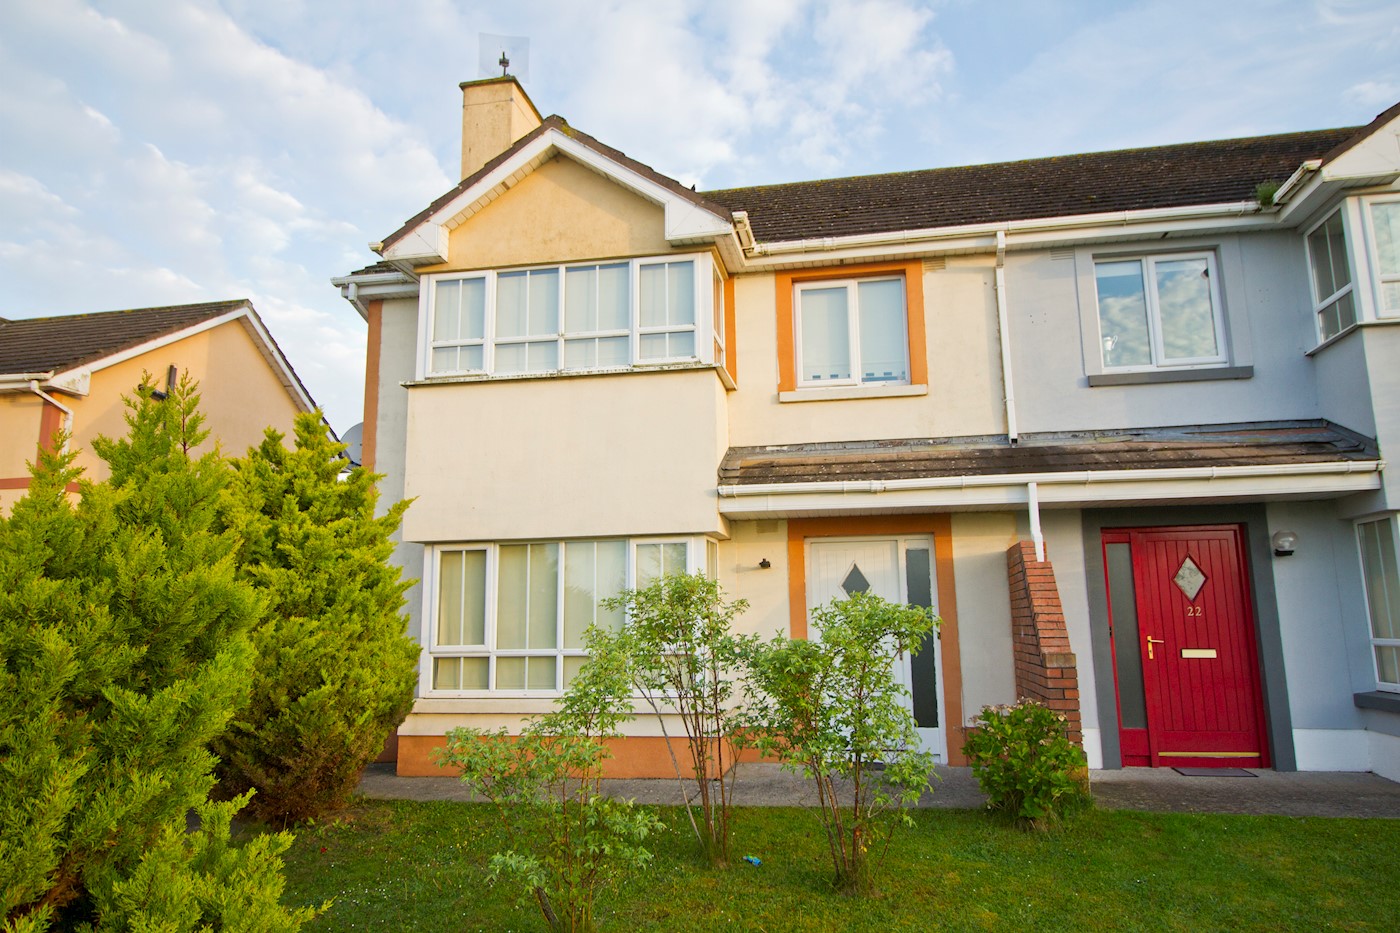 21 Philips Vale, Daingean, Offaly, R35 H635 1/3